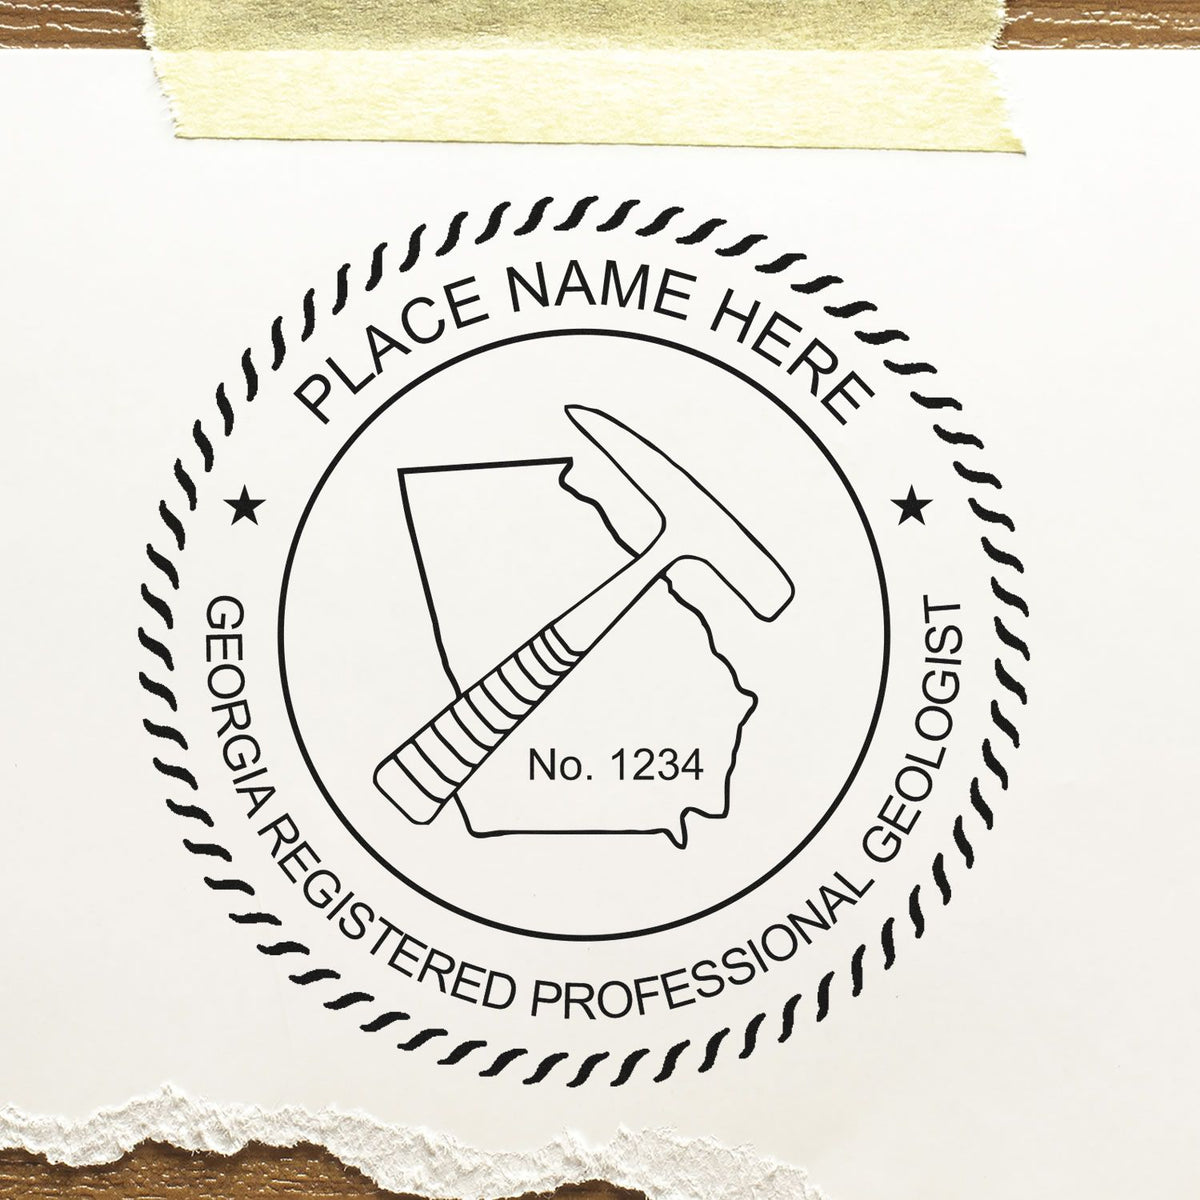 A photograph of the Georgia Professional Geologist Seal Stamp stamp impression reveals a vivid, professional image of the on paper.